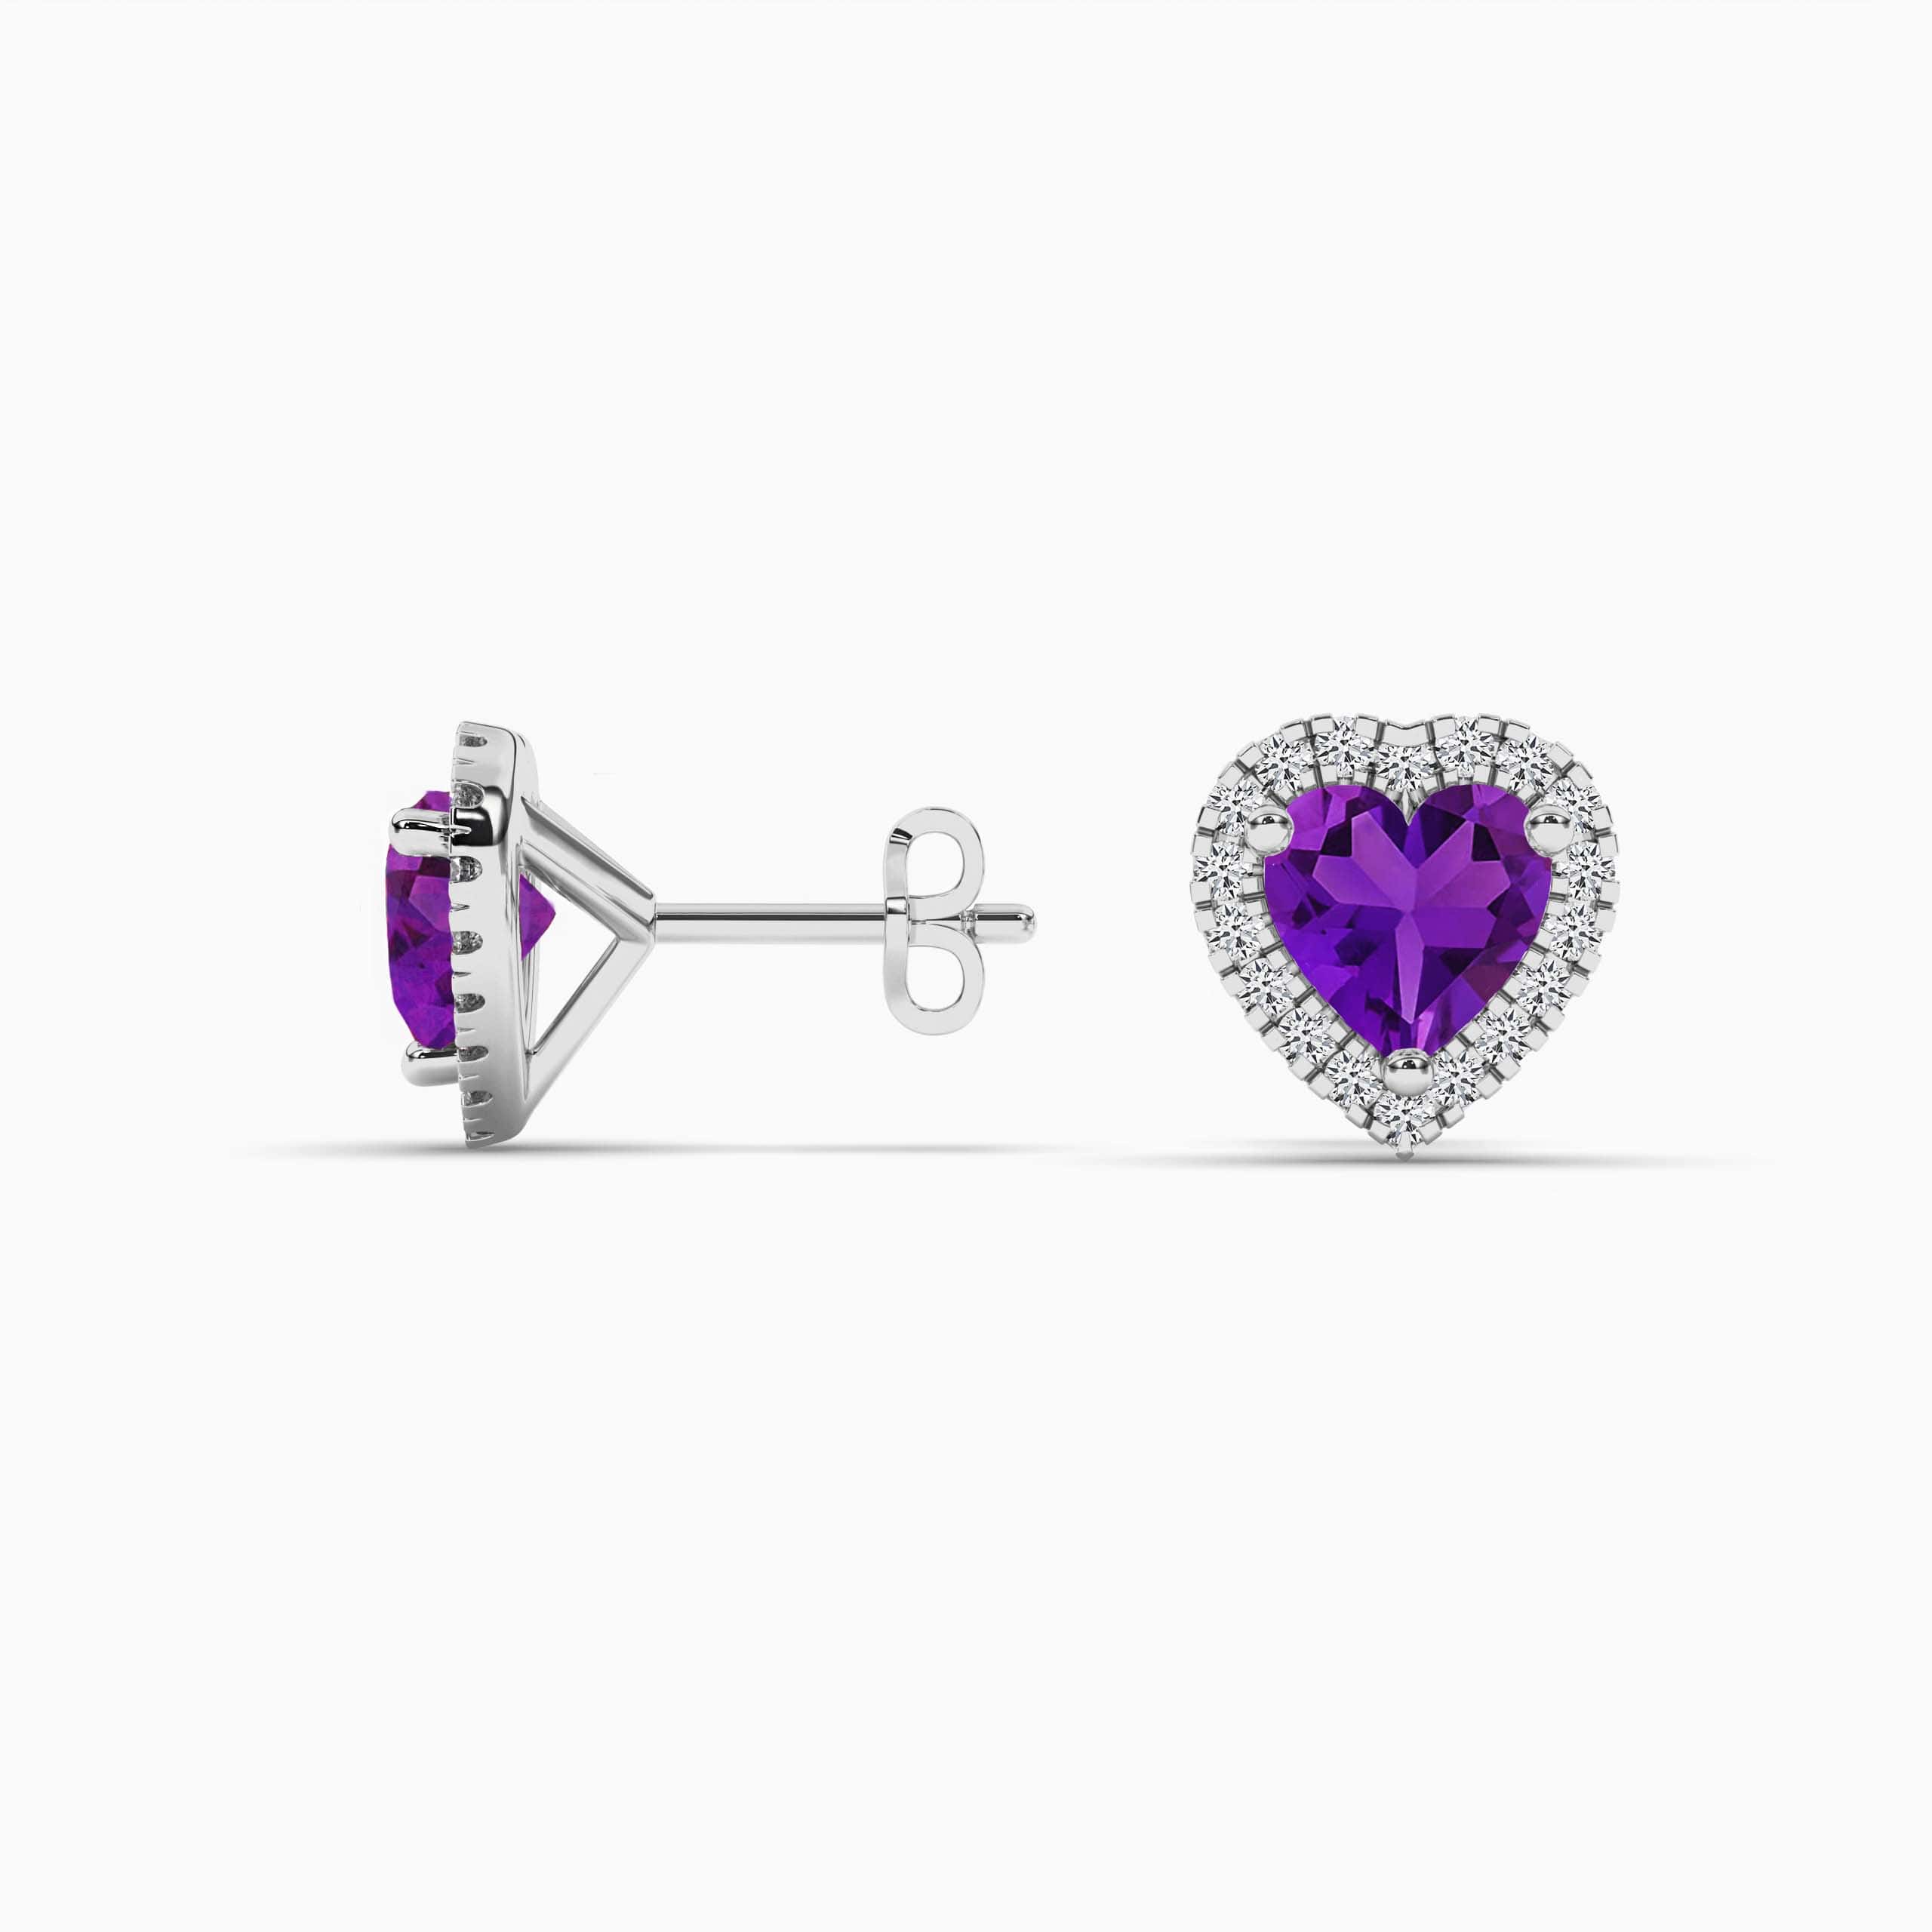 White Gold Heart Cut Amethyst Gemstone with Round Diamonds Halo Stud Earrings